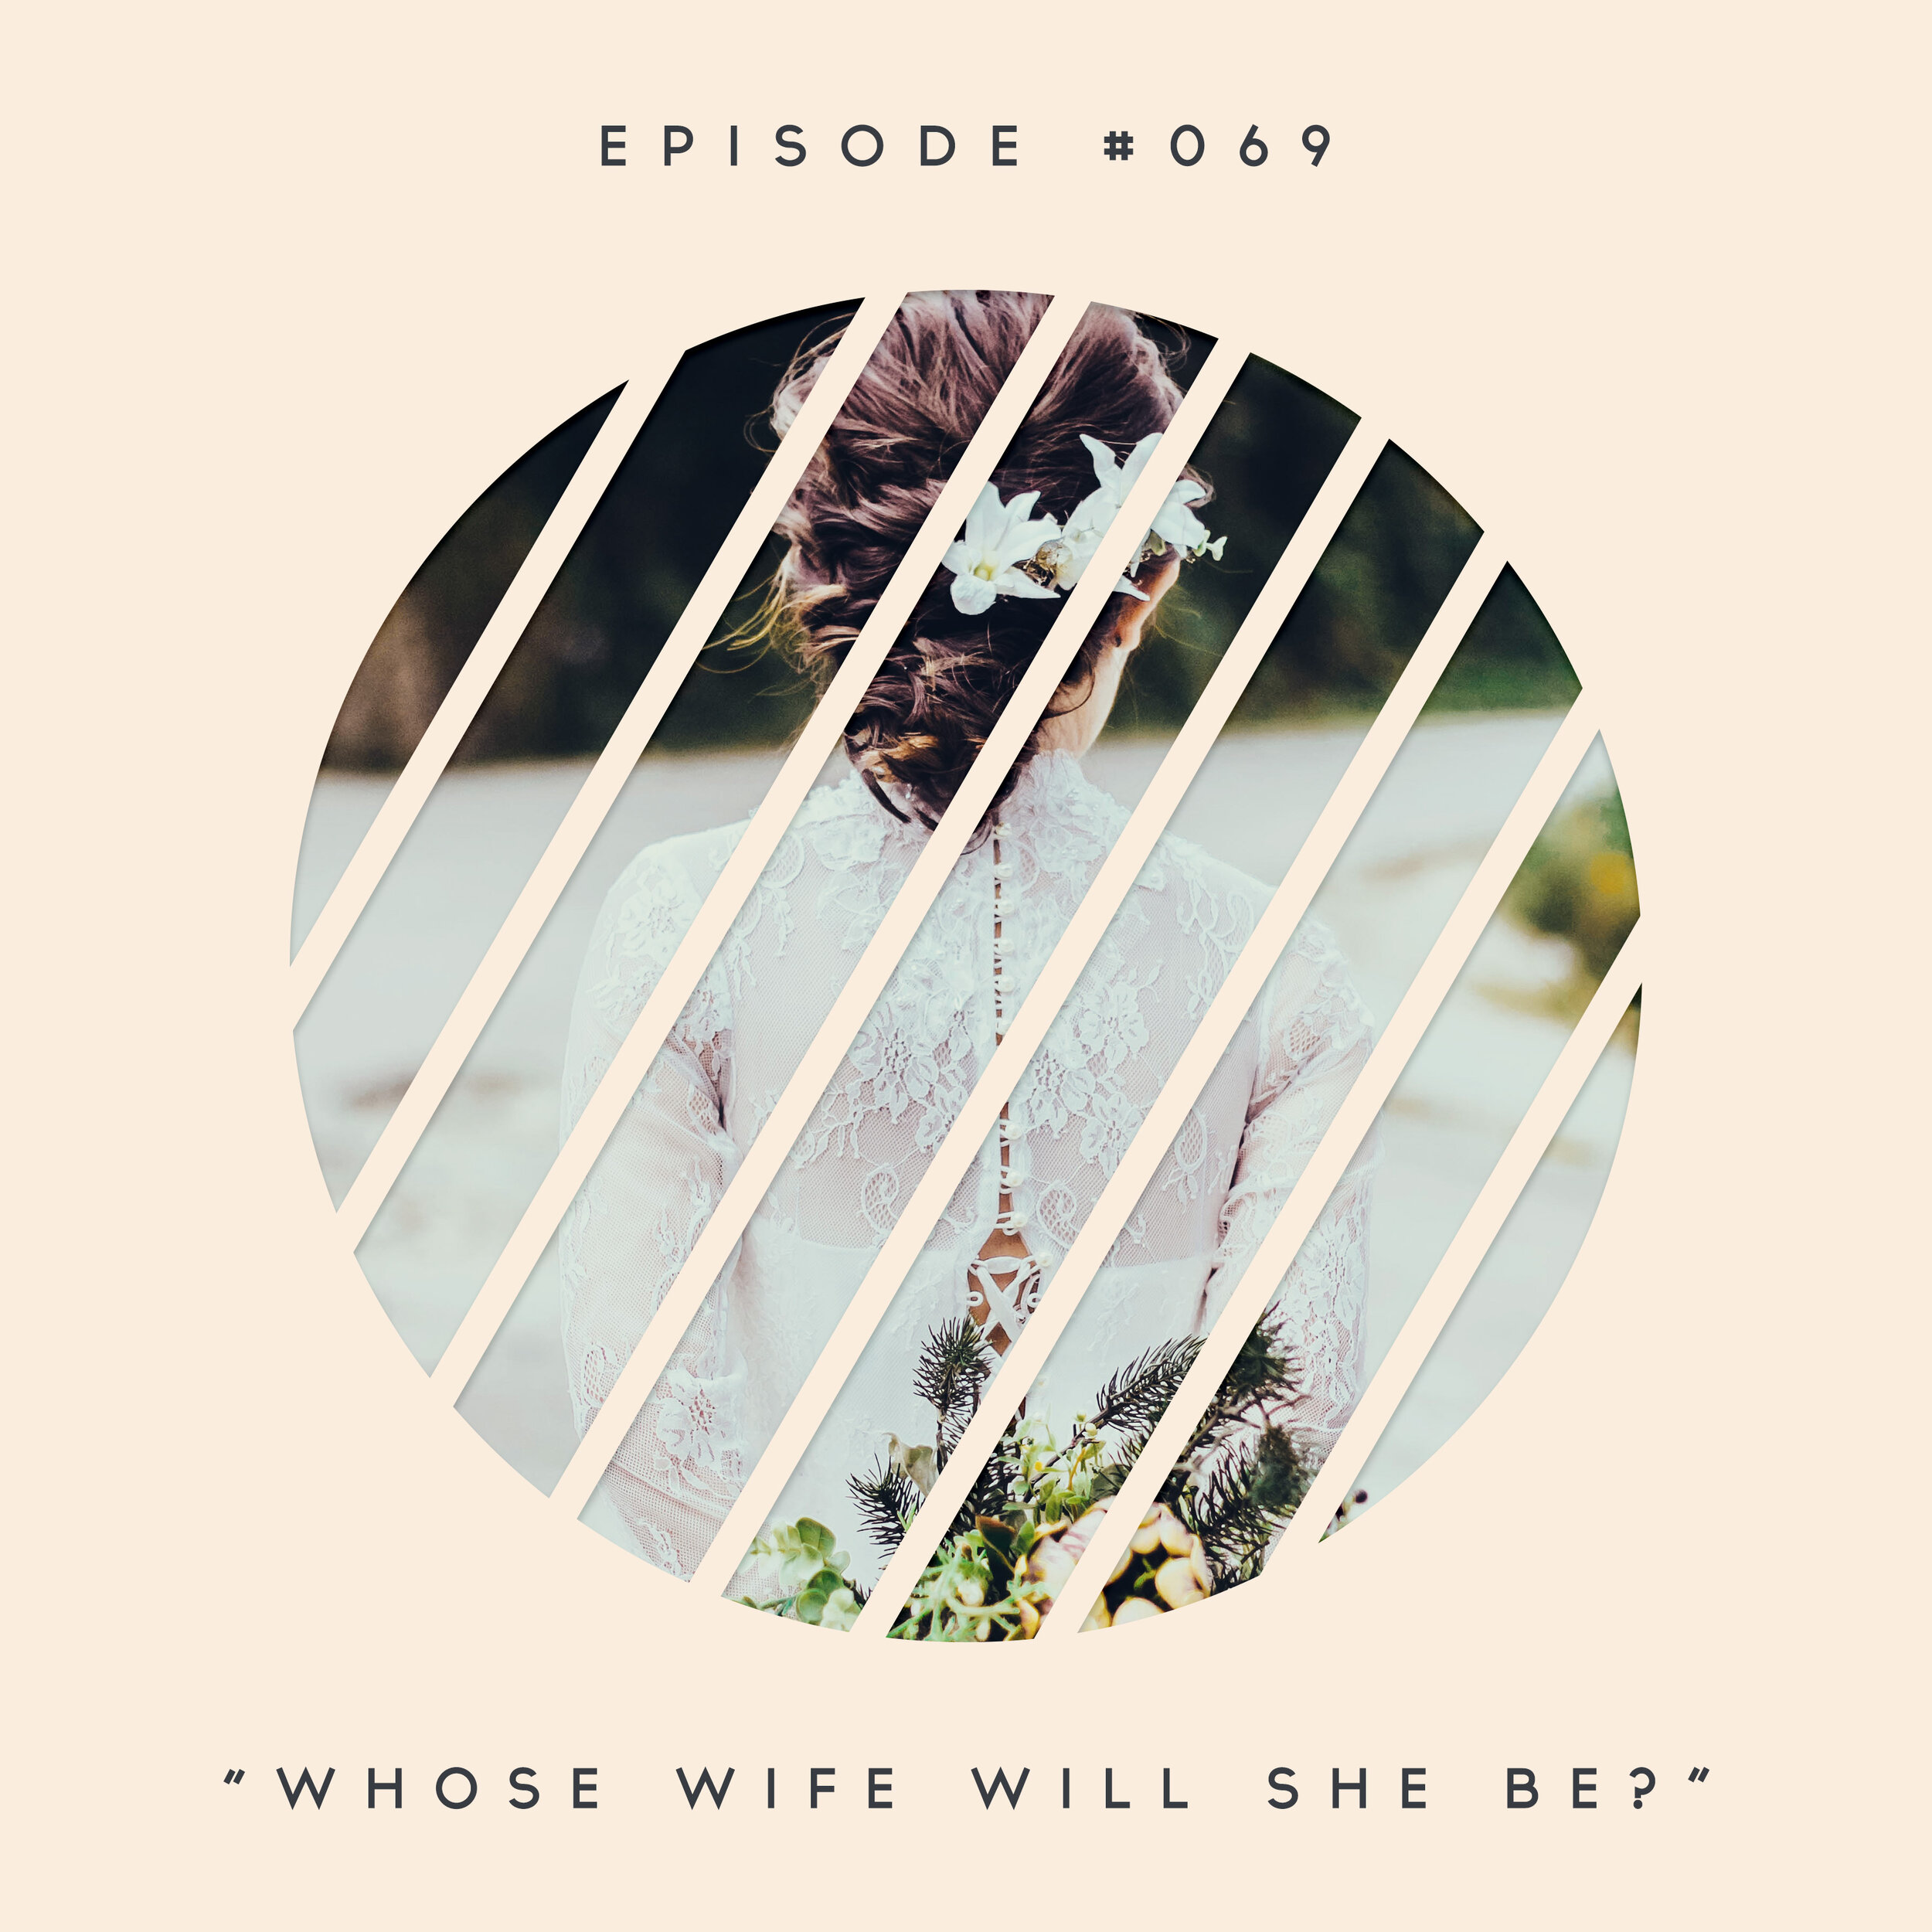 69: Whose Wife Will She Be?